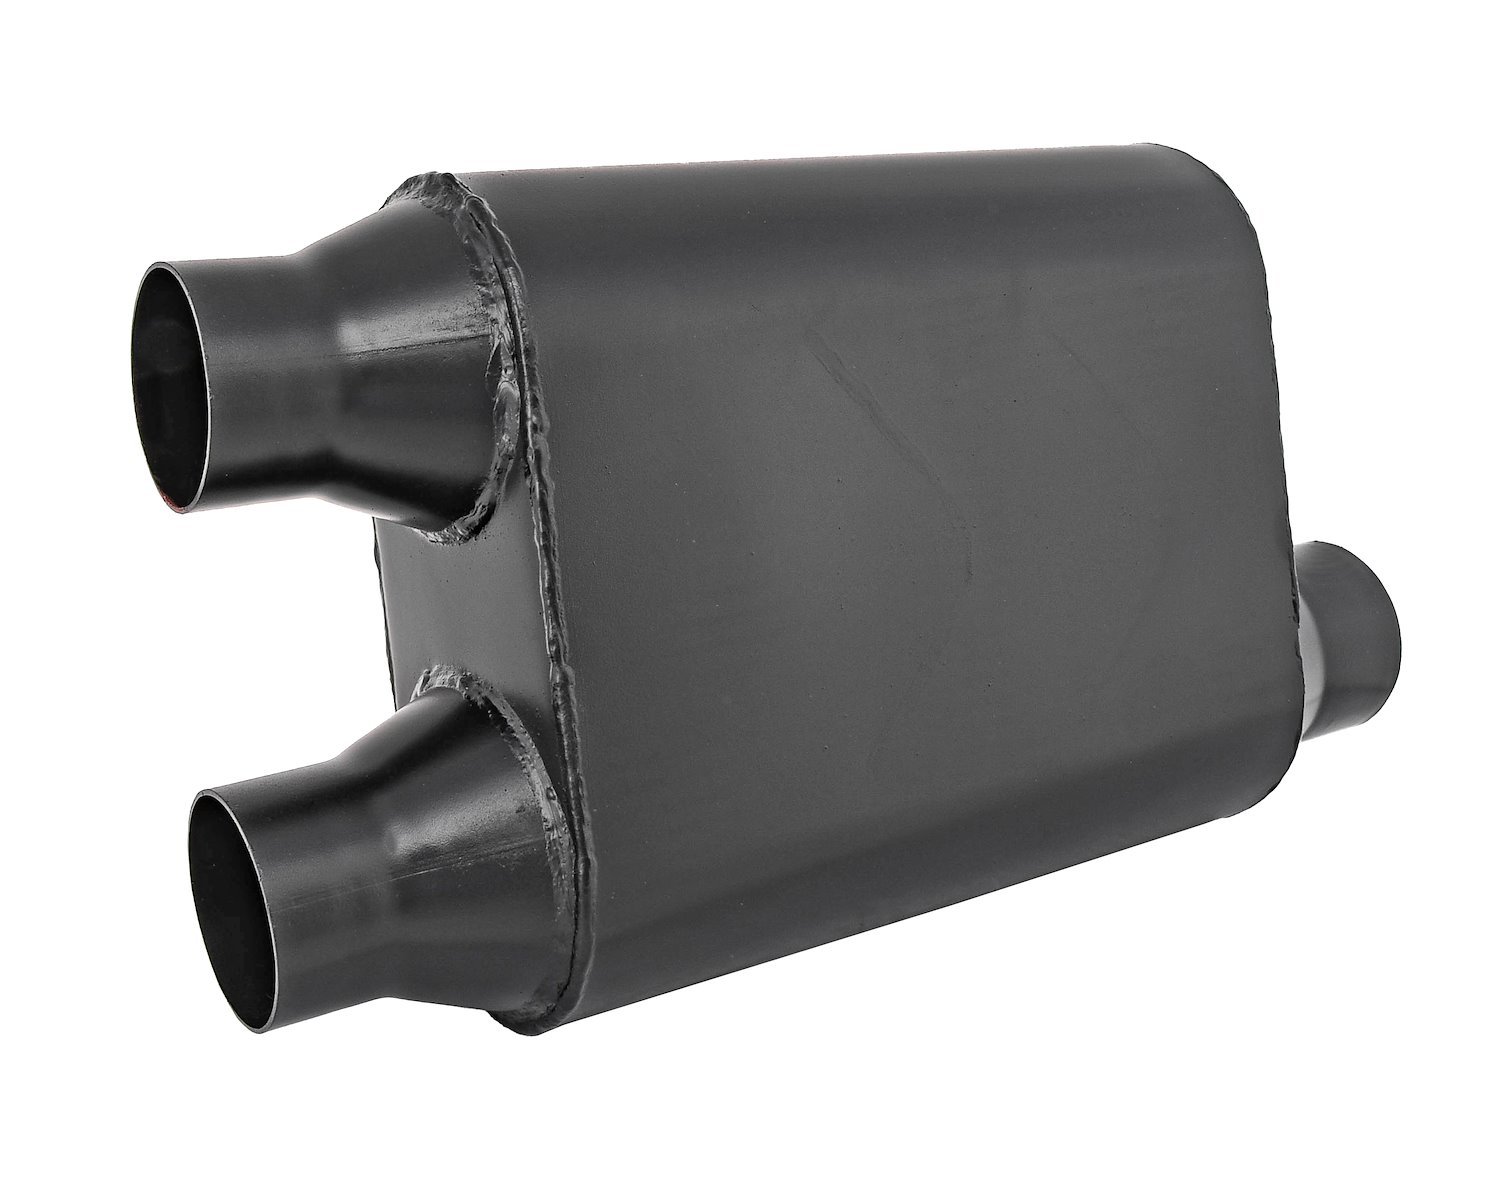 Chambered Deep-Tone Muffler 2.500 in. Offset Inlet / 2.250 in. Dual Outlets